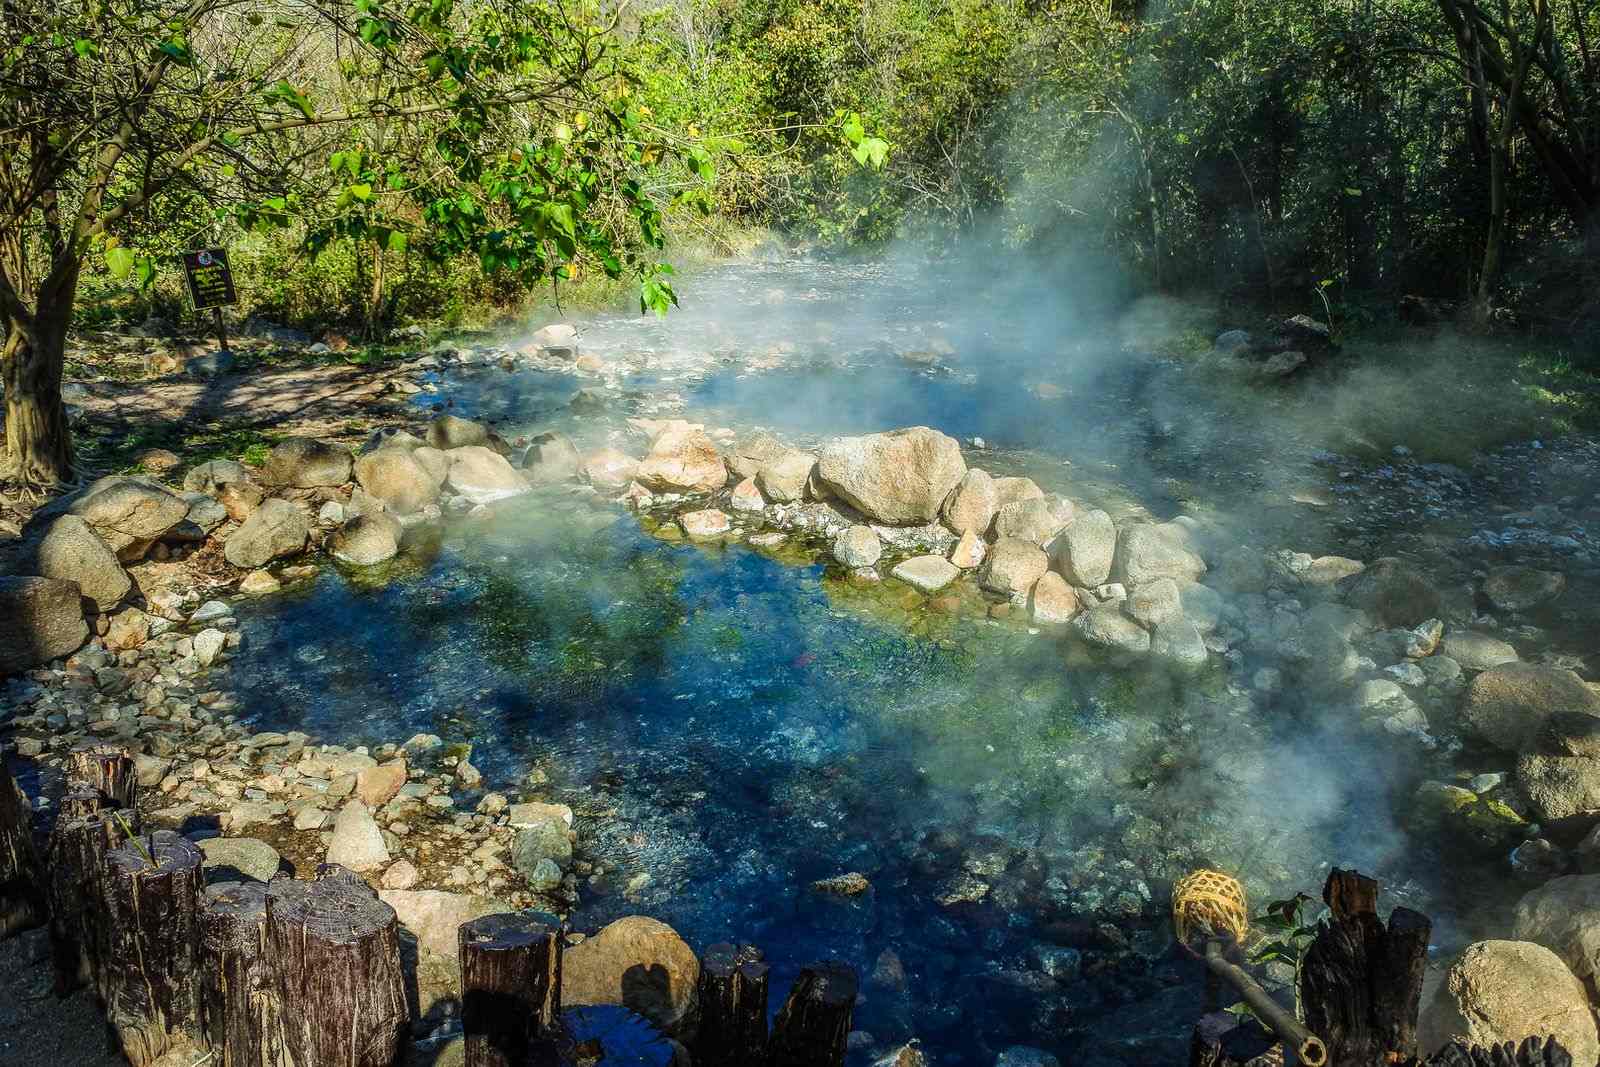 Steam rising from the Wall Creek Warm Springs in between bushes and foliage.